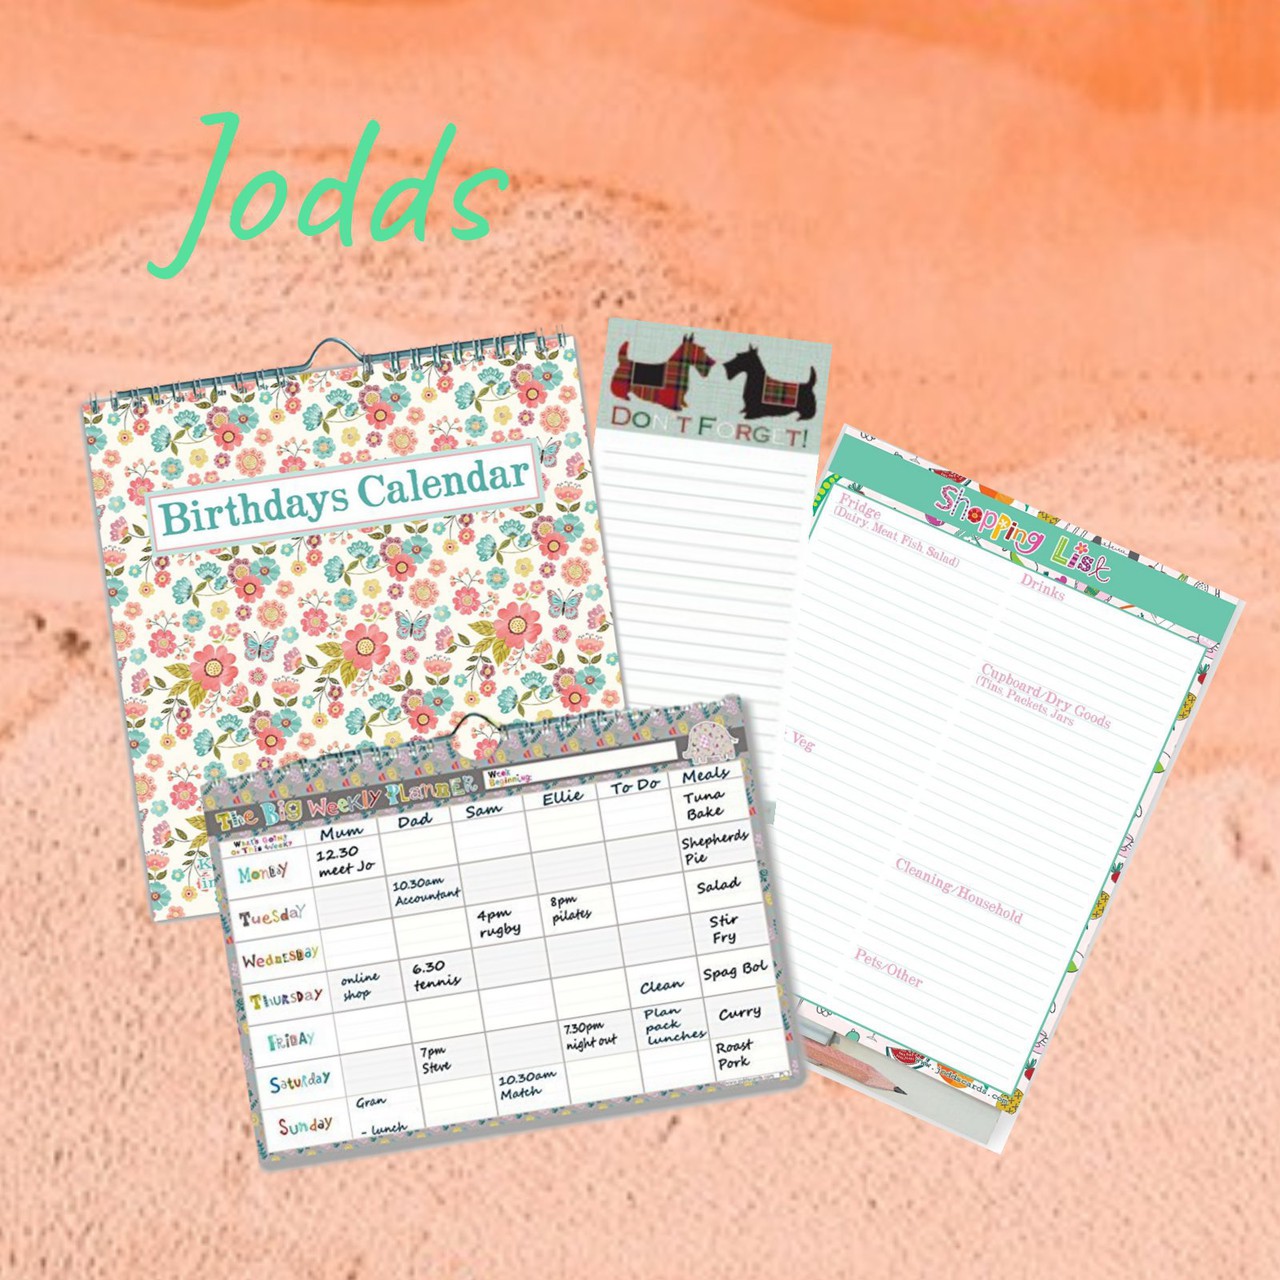 jodds card and organised stationery